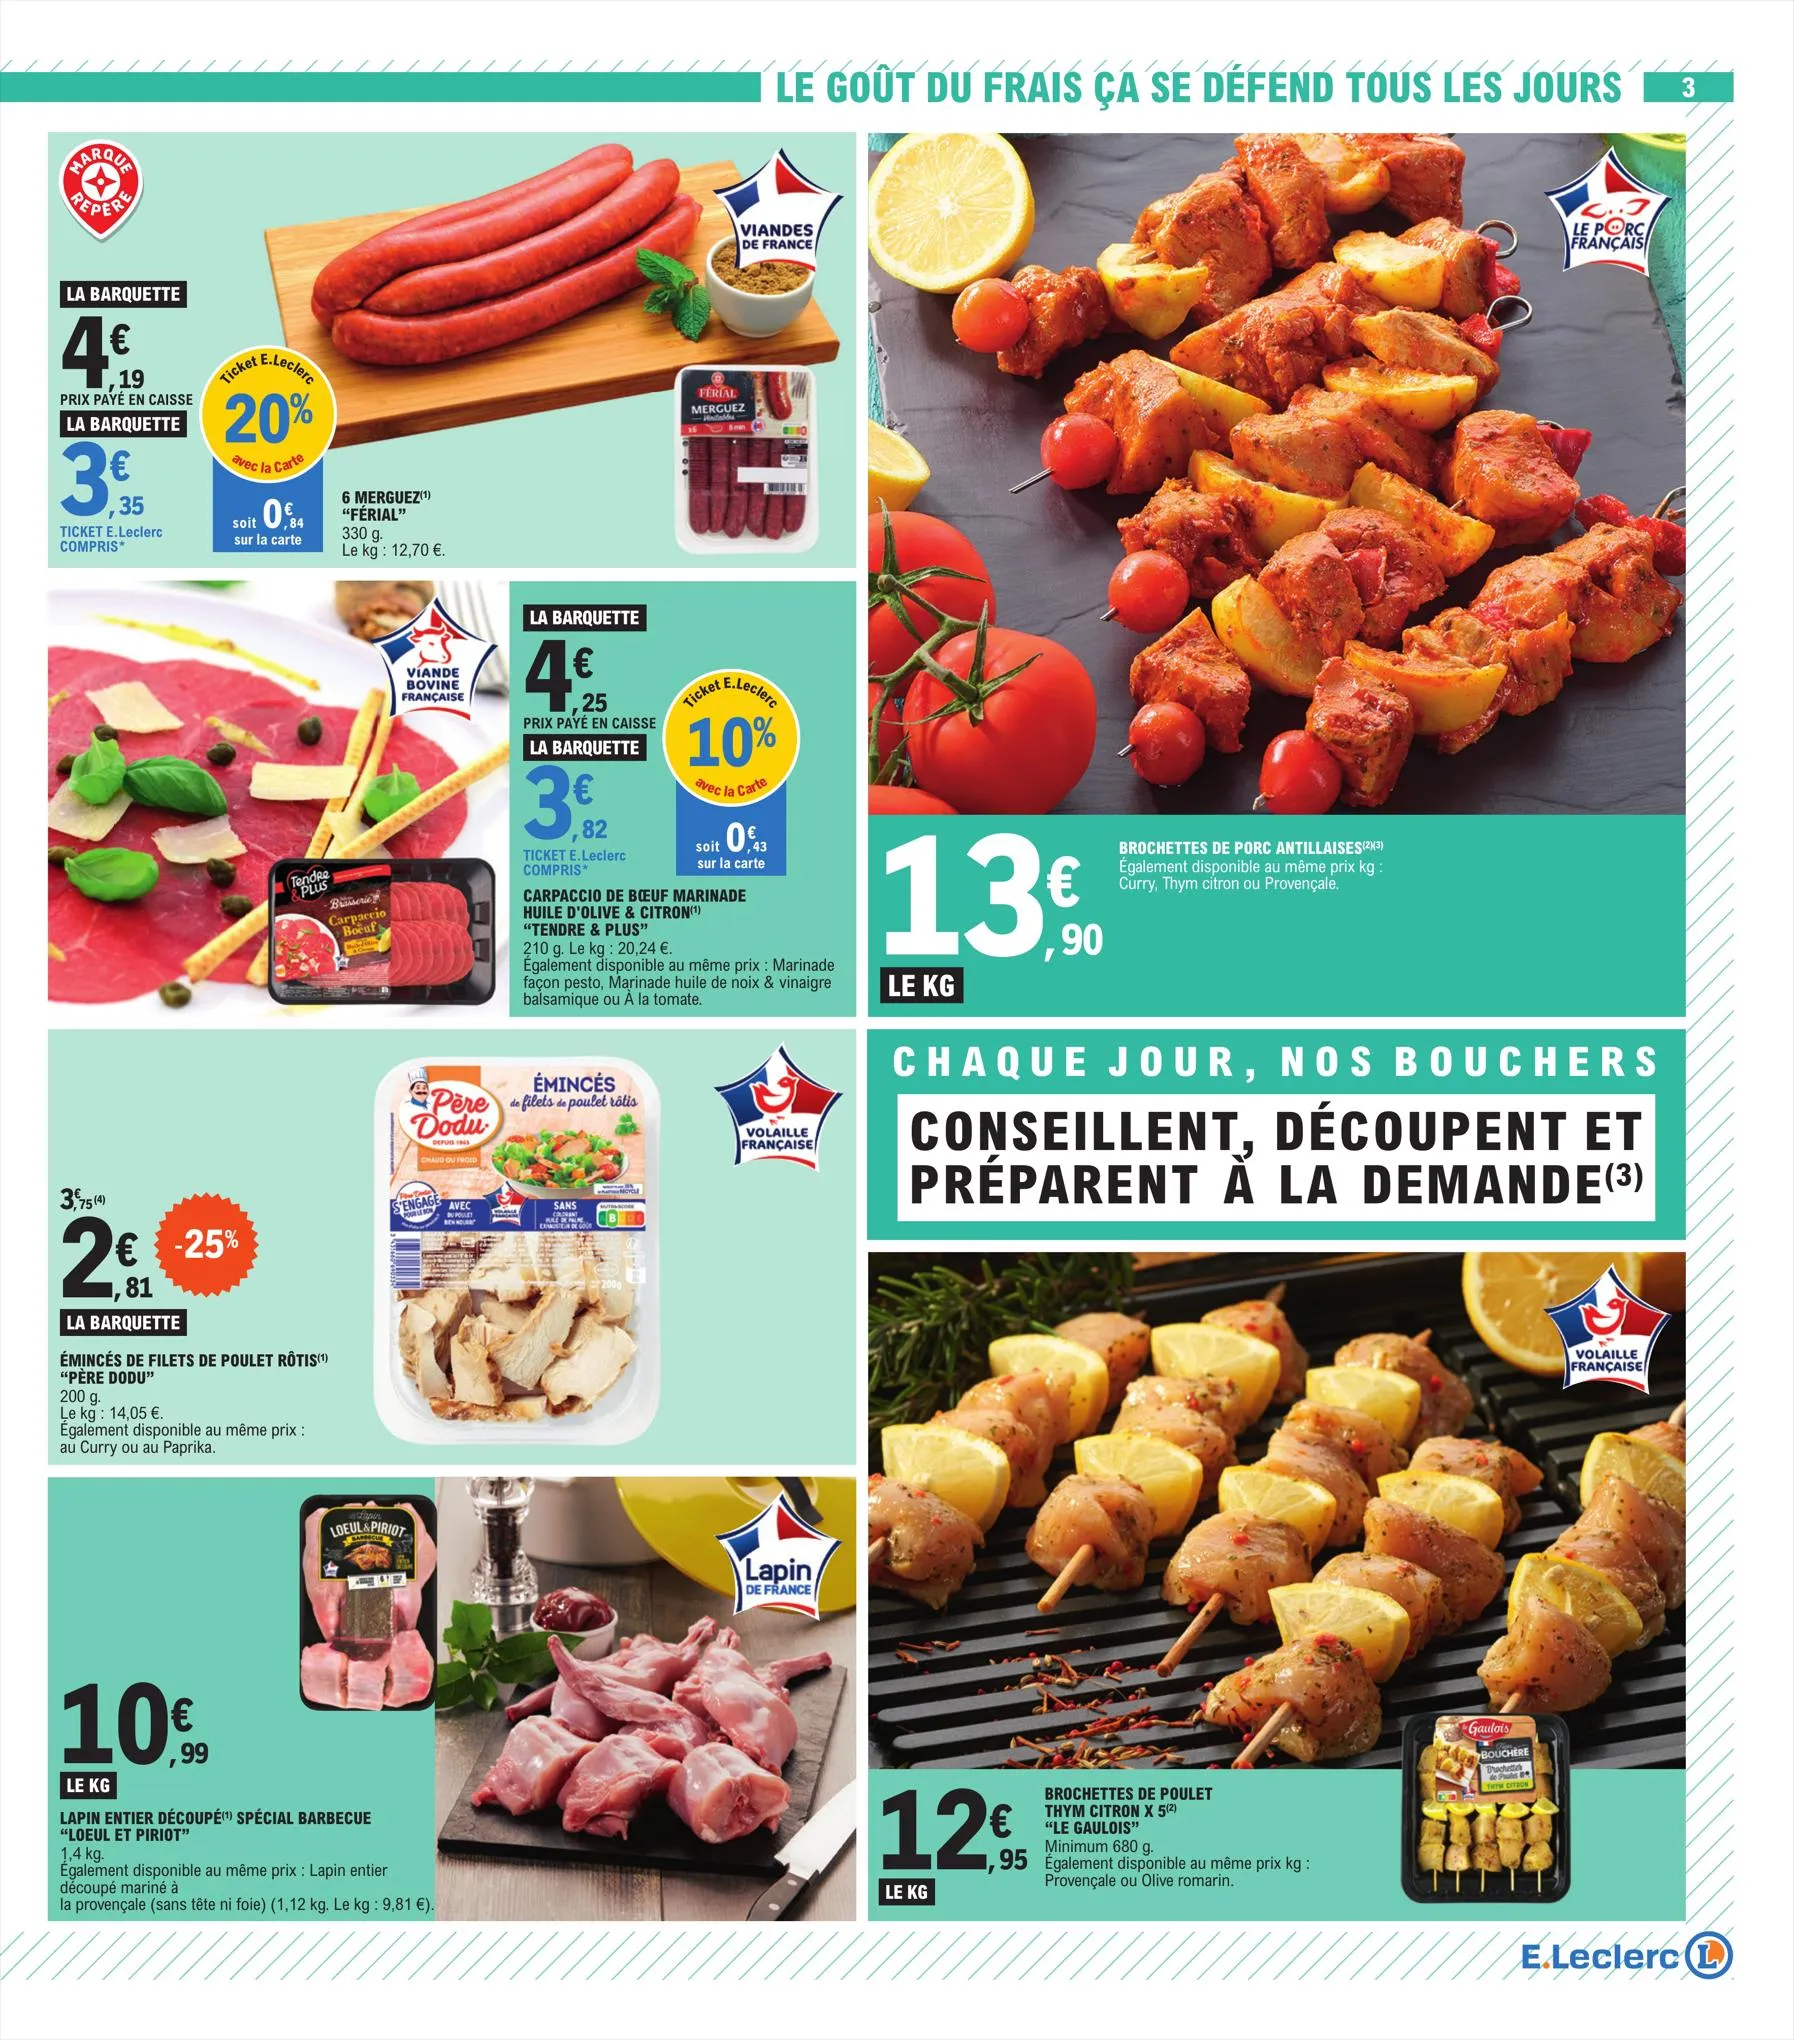 Catalogue Relance Alimentaire 11 - Mixte, page 00003